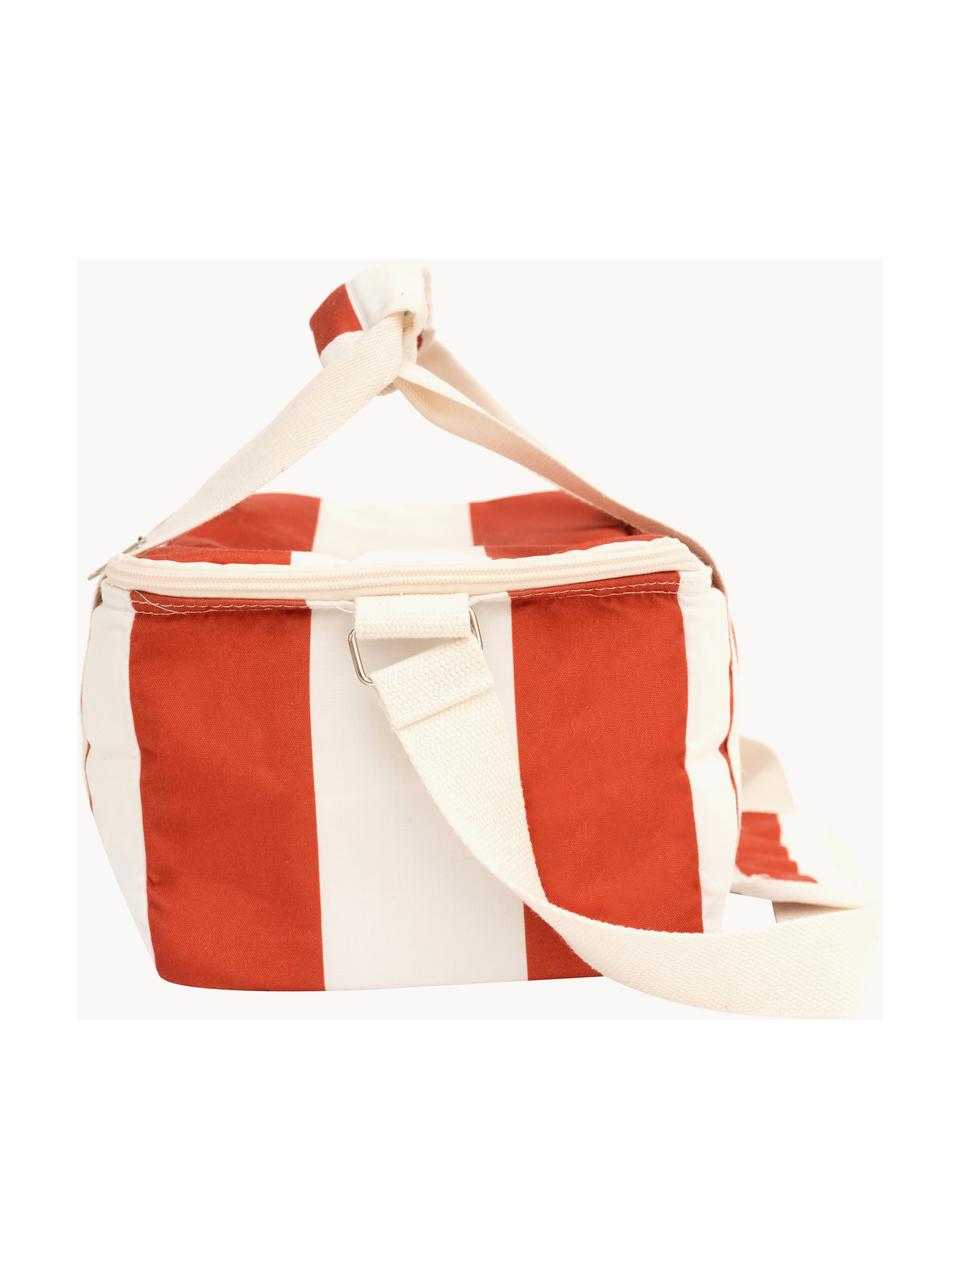 Sac isotherme Holiday, 50 % coton, 25 % polyester, 25 % PVC, Rouge rouille, blanc, larg. 32 x haut. 20 cm